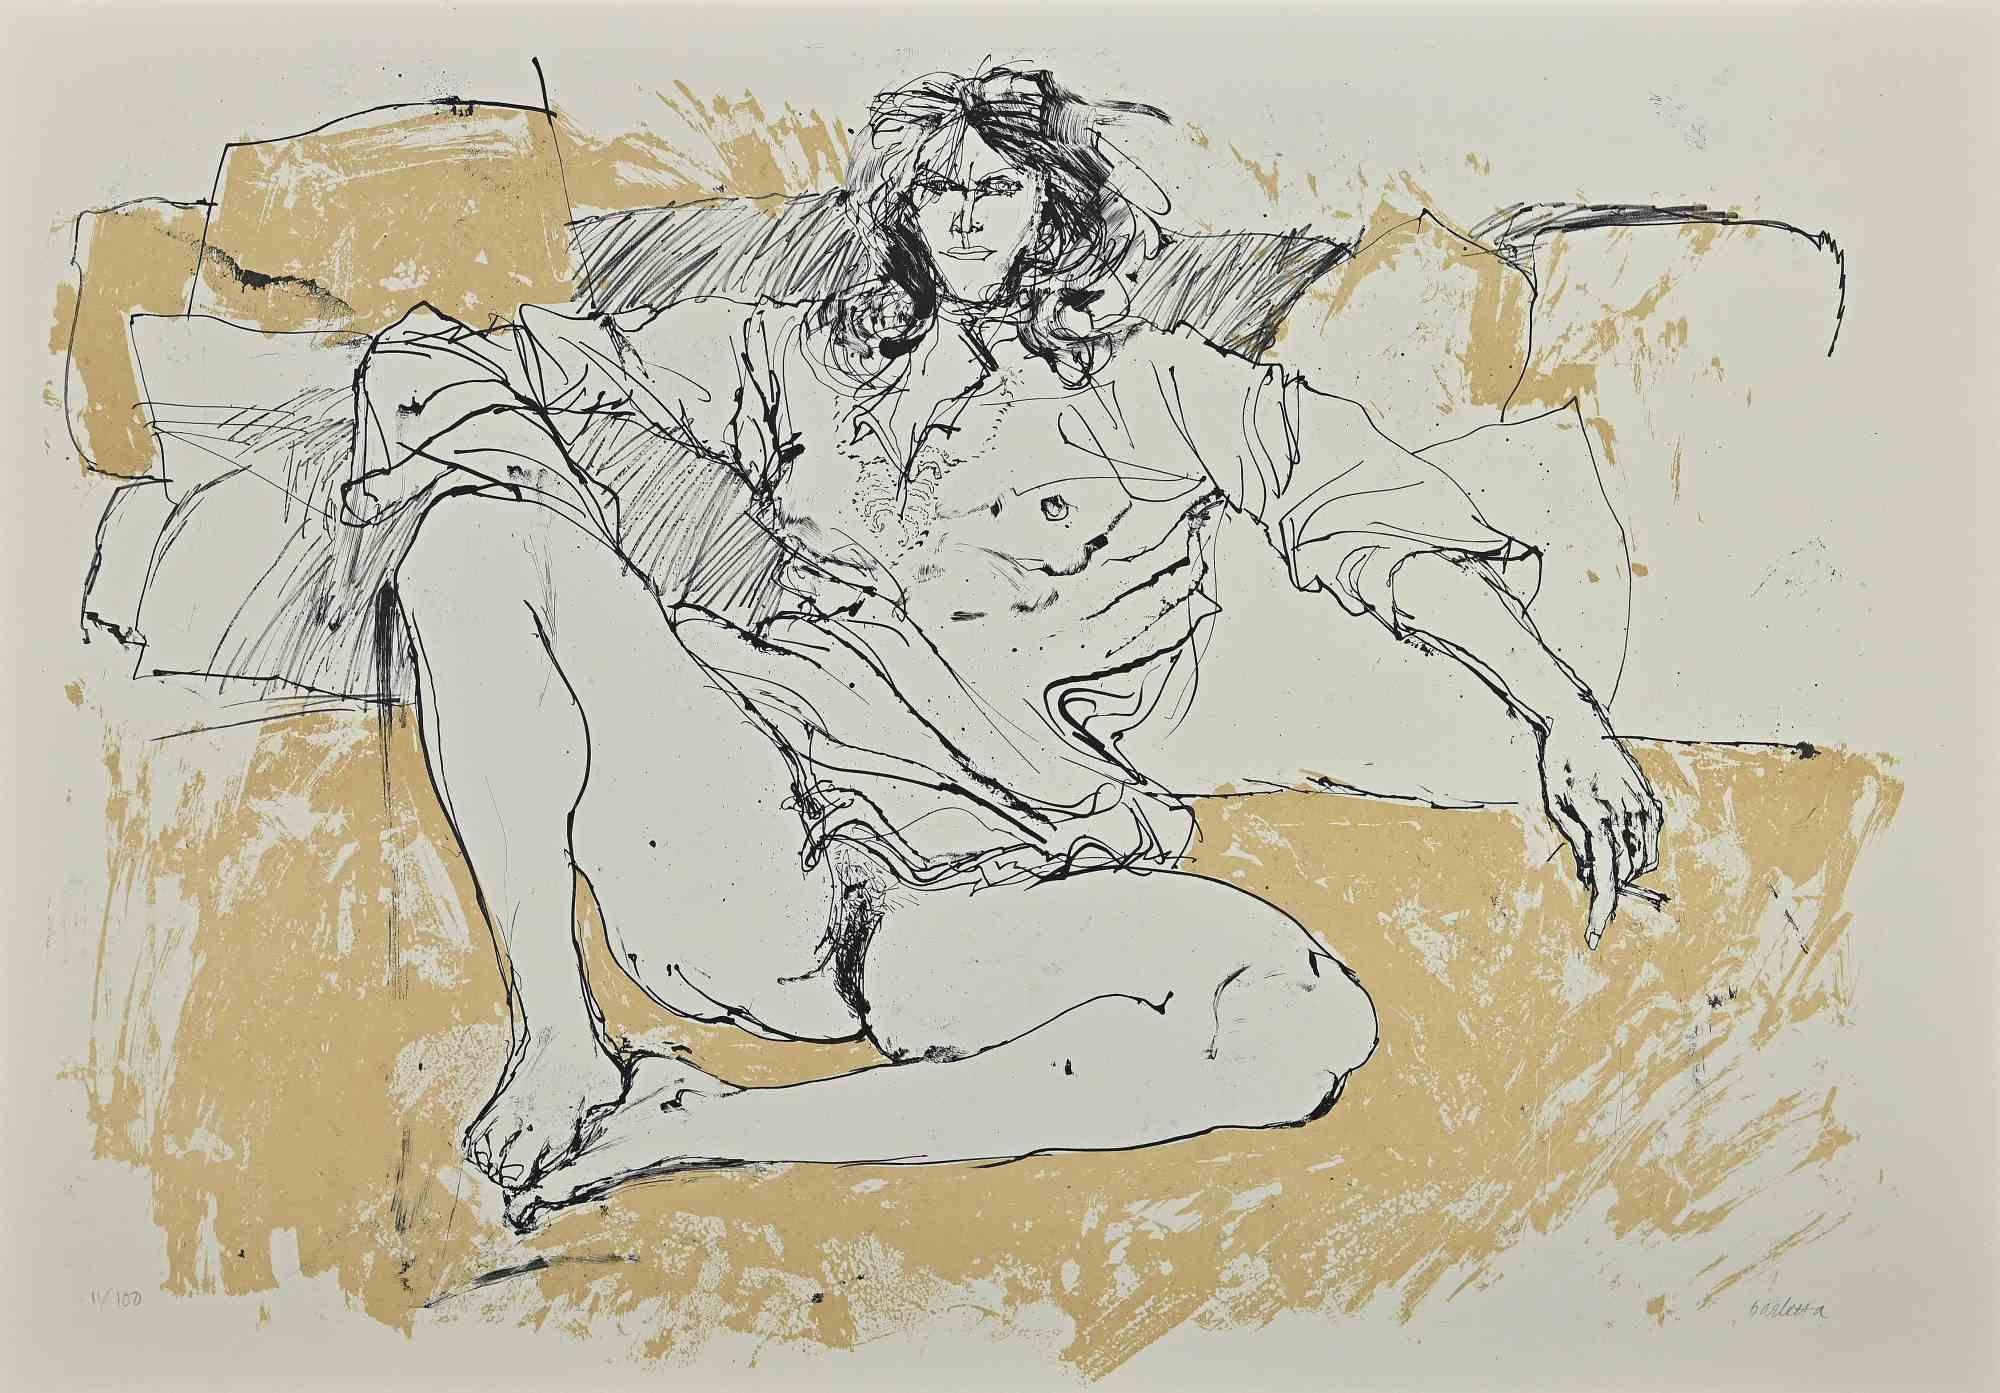 Nude is a lithograph a on paper realized in 1980 by Sergio Barletta.
Hand-signed on the lower right in pencil. from the edition of 100 prints. Numbered in pencil on the lower left.
In good condition.
The artwork represents a lying down nude through